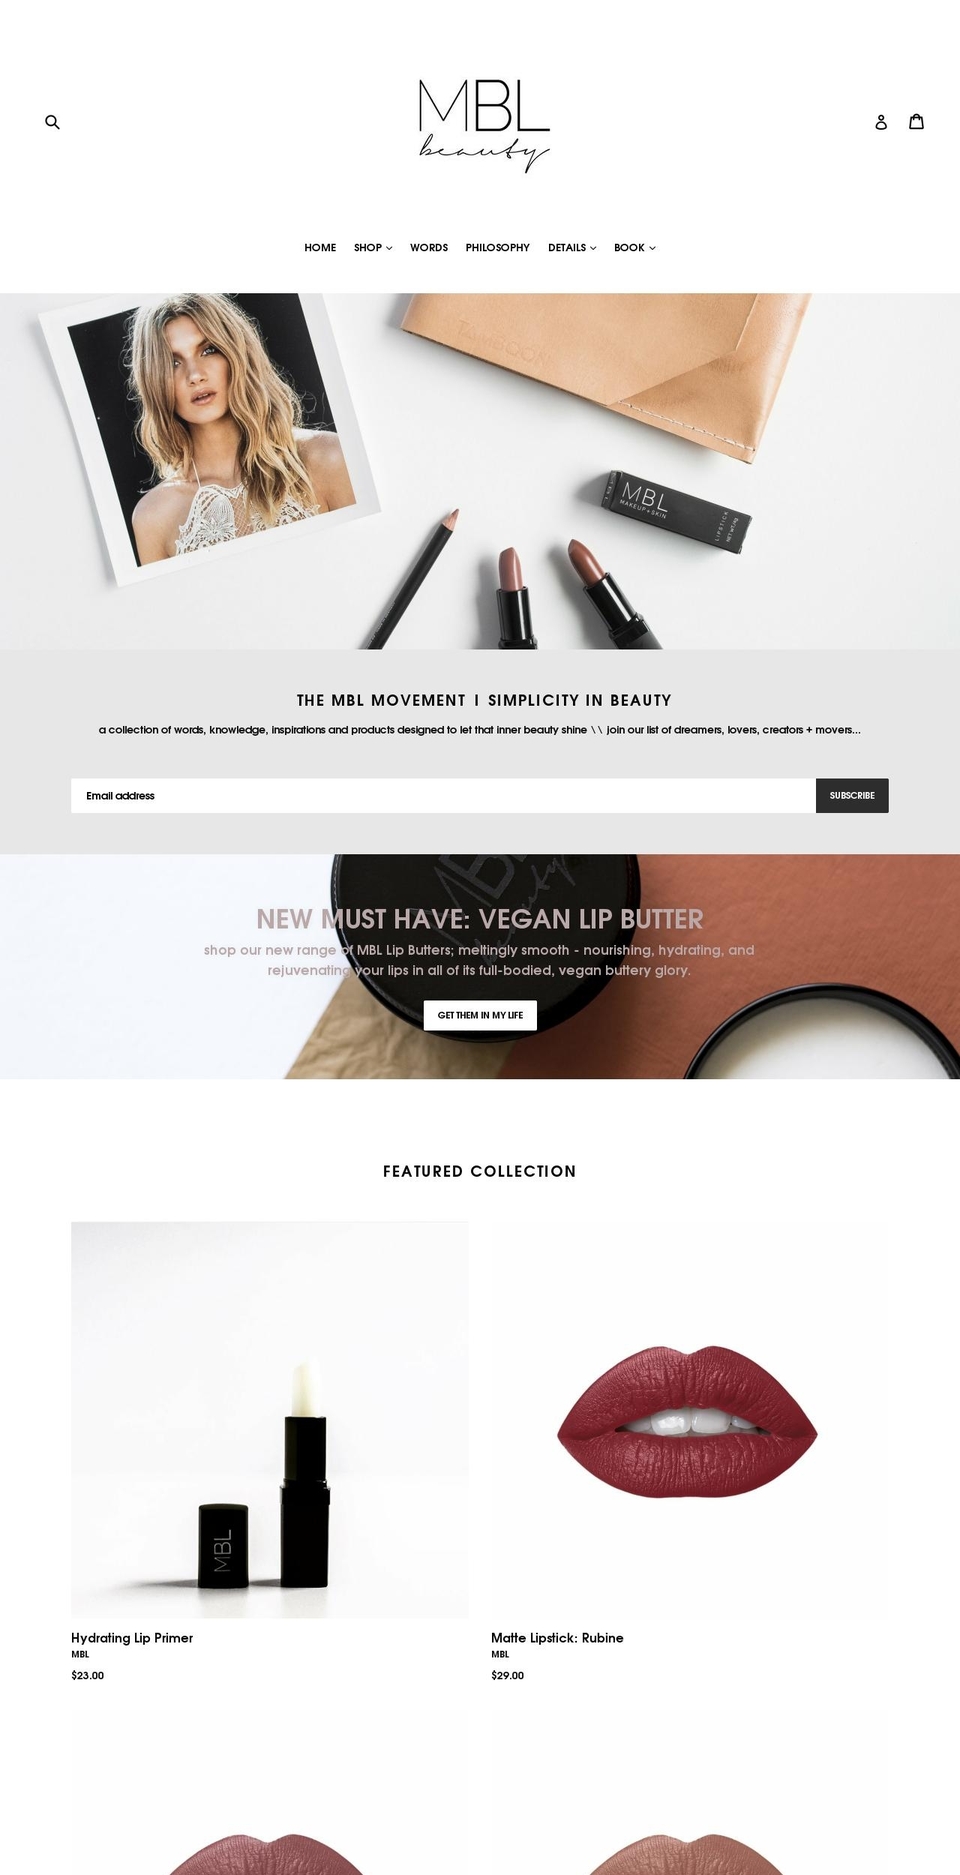 Snow Shopify theme site example mblbeauty.com